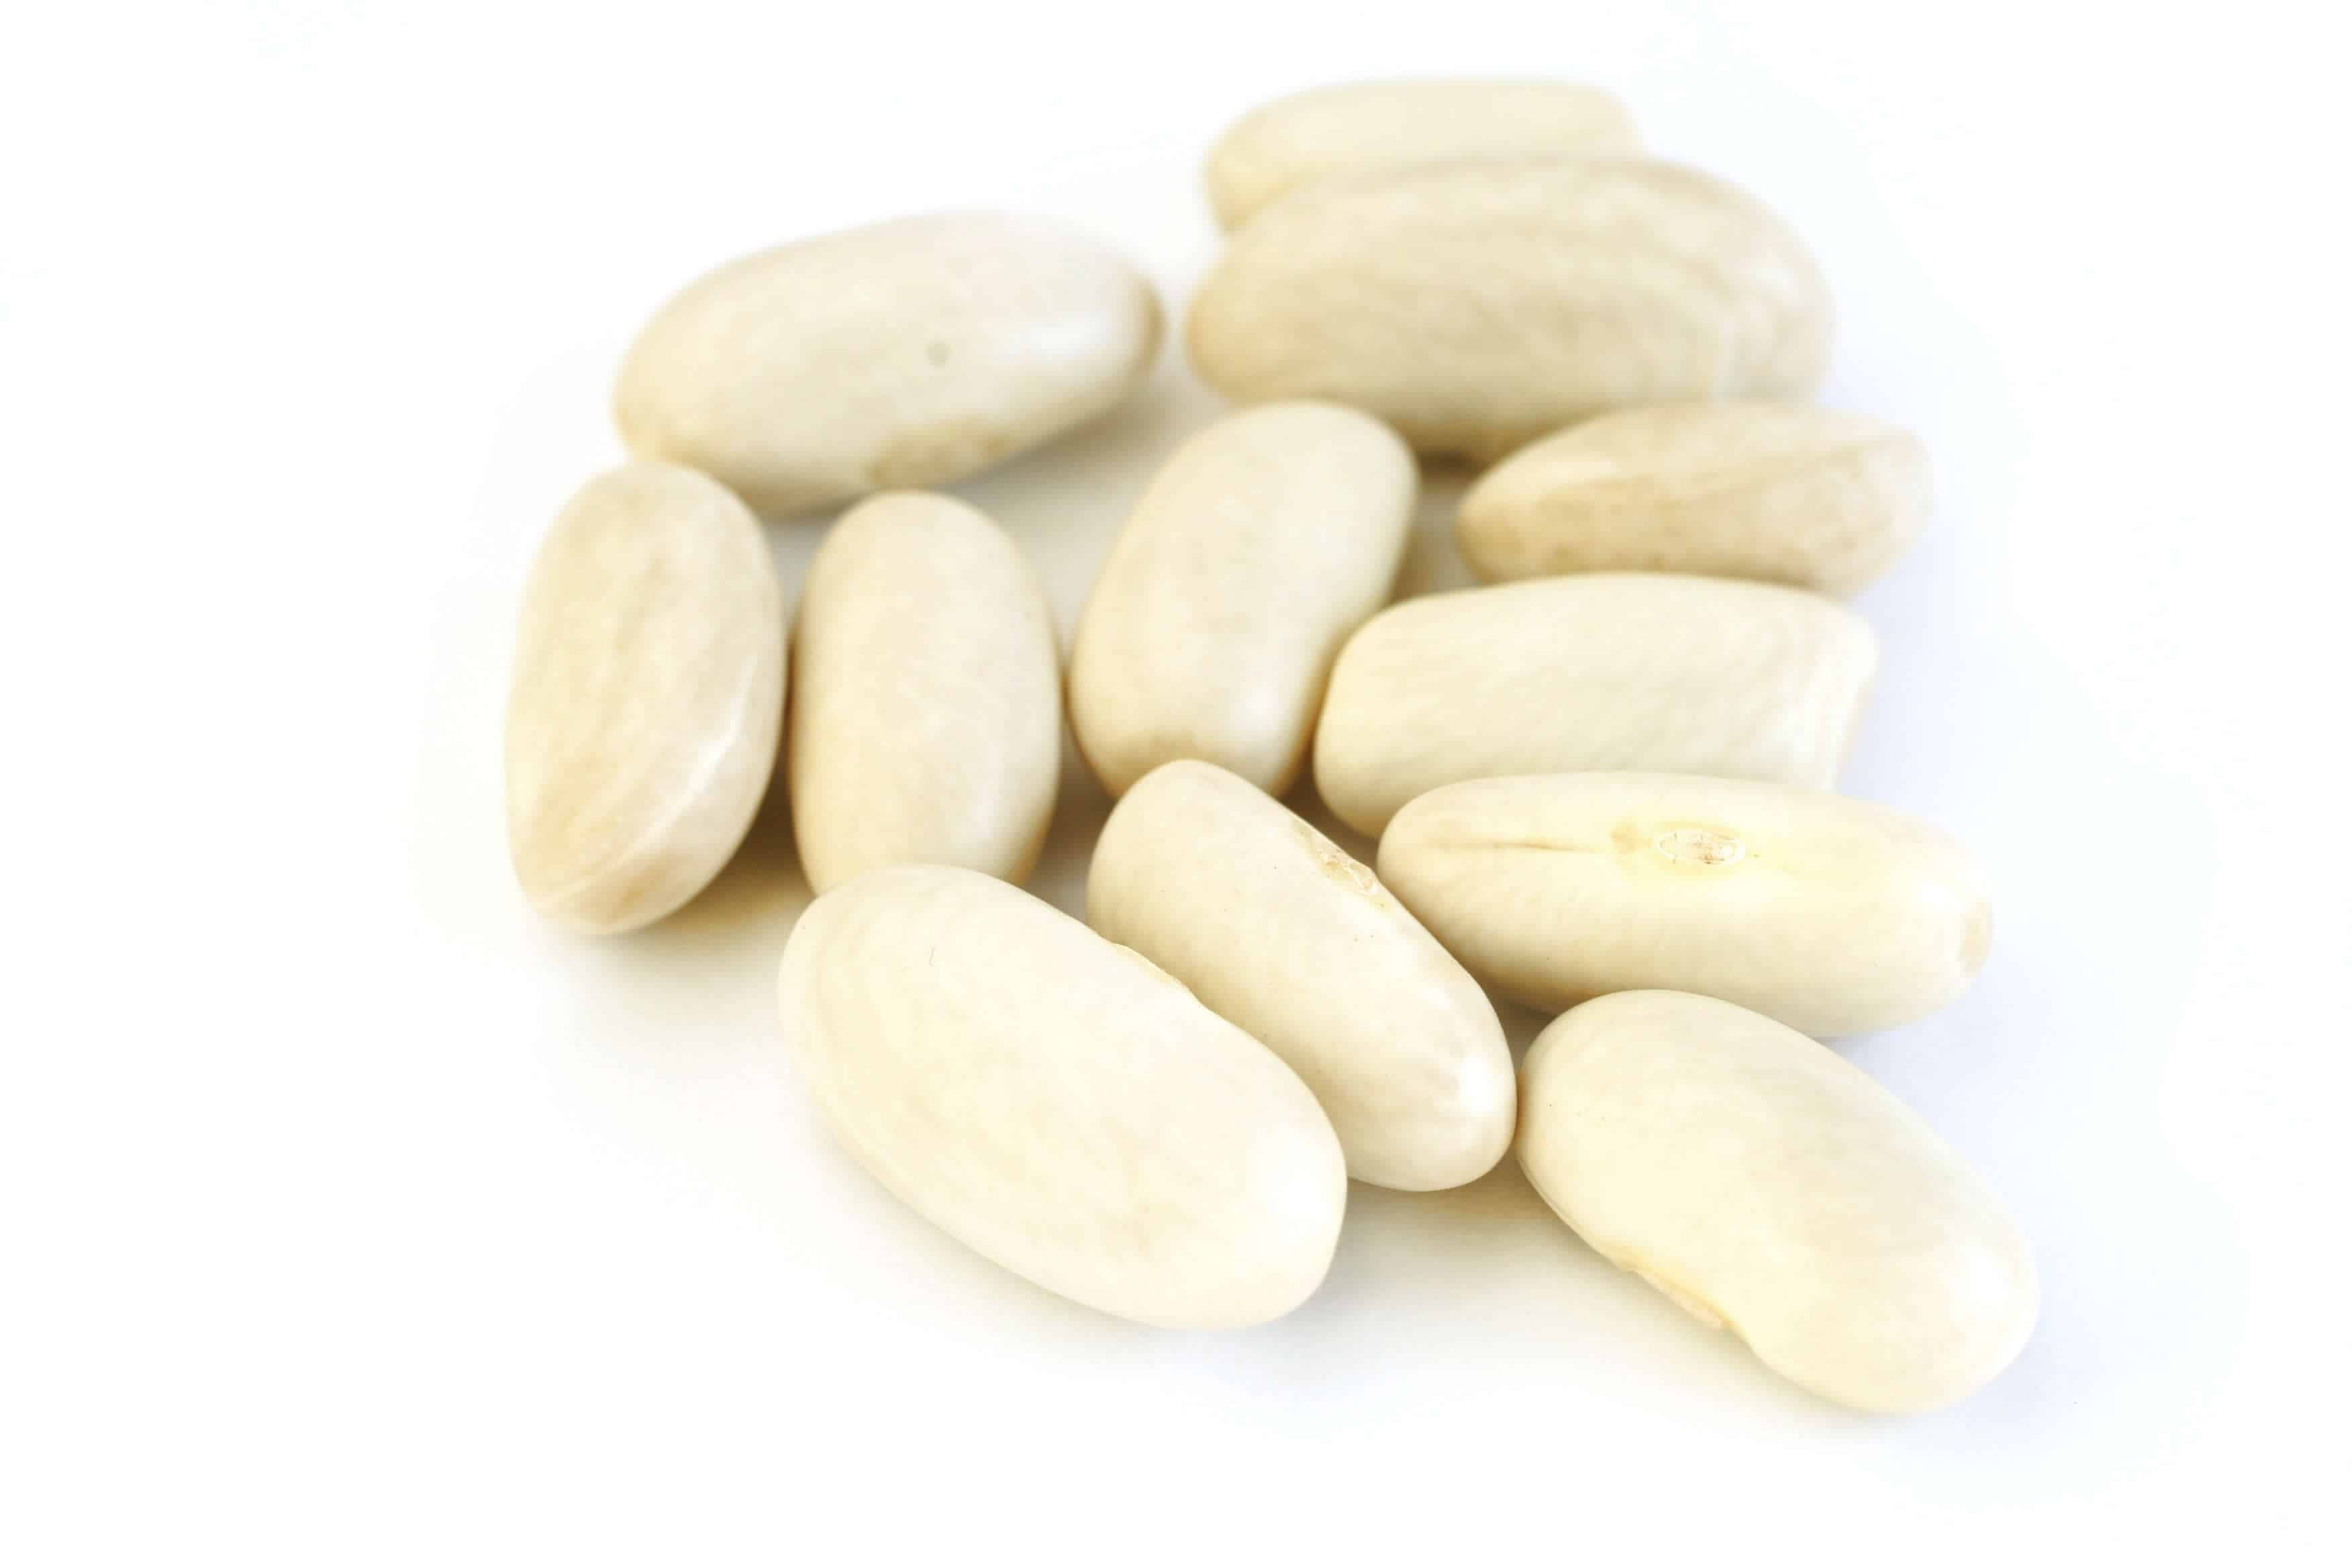 What are white kidney beans